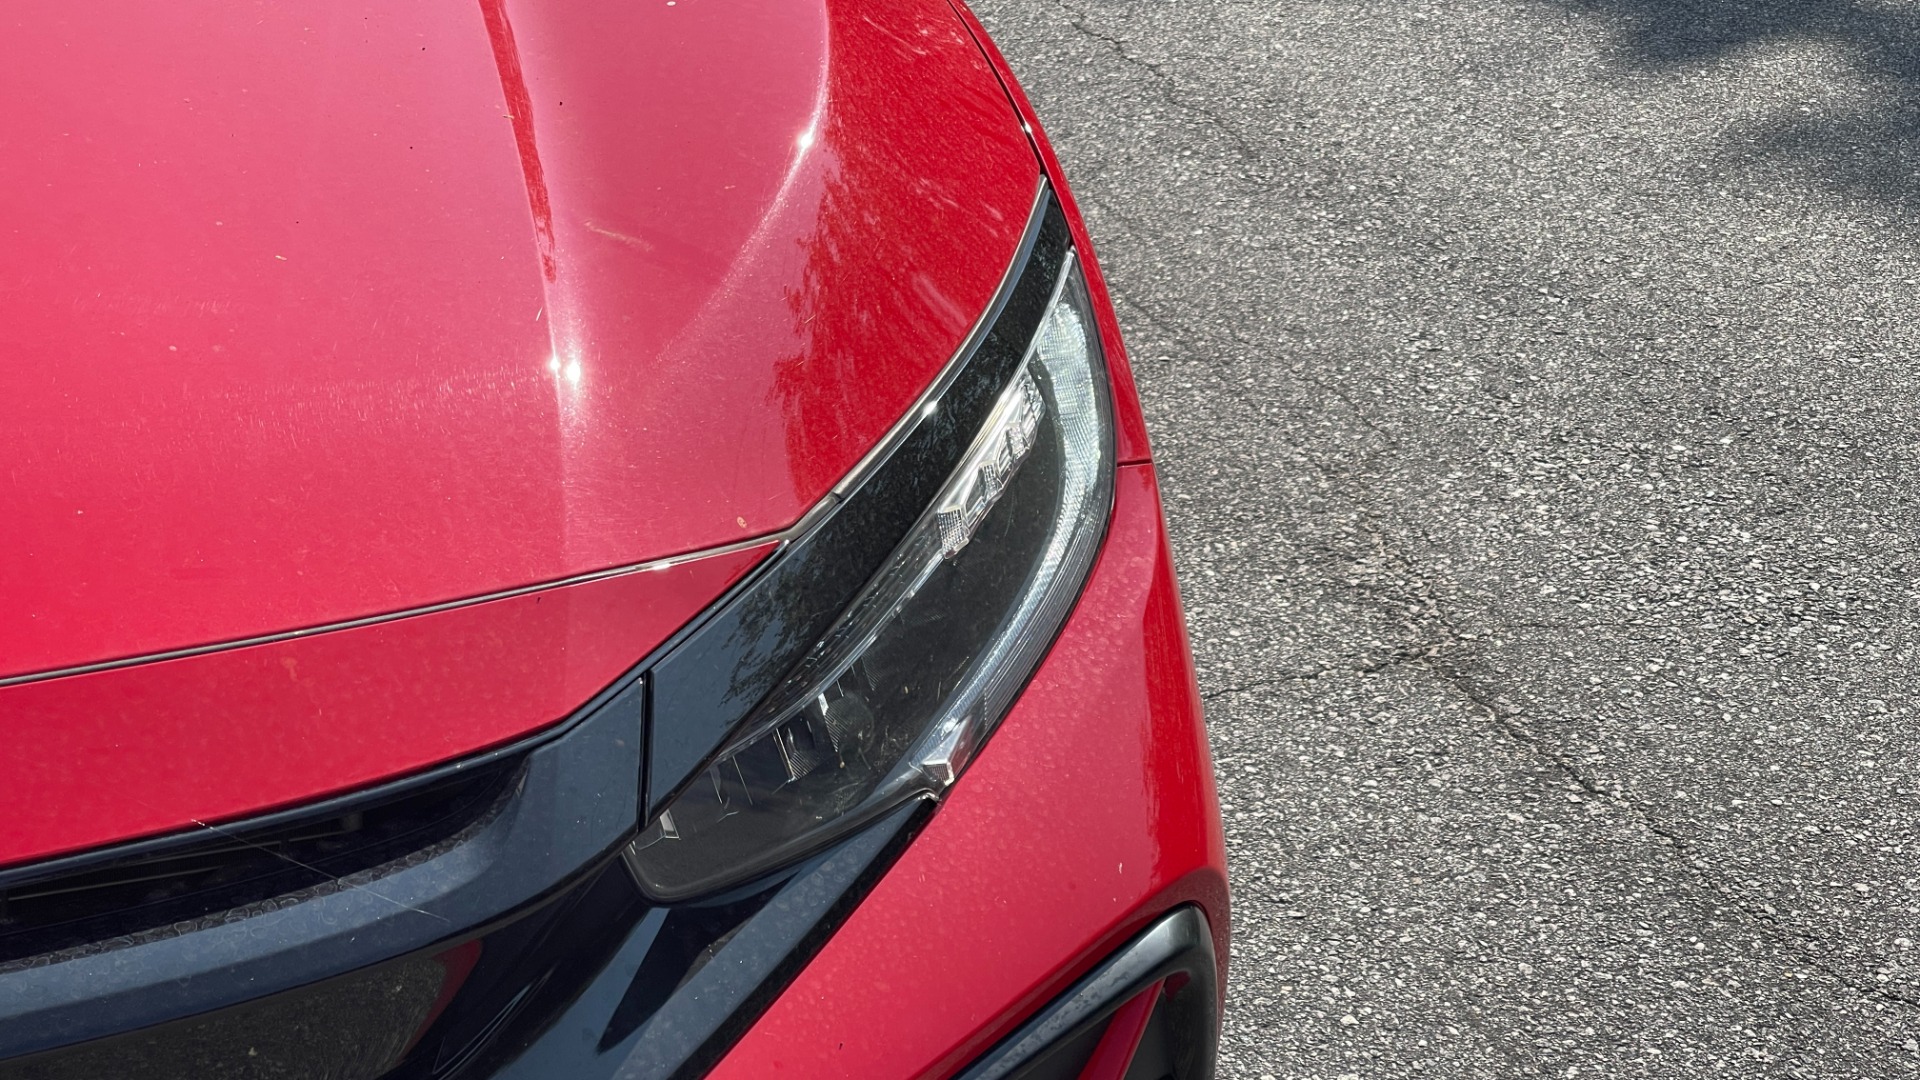 Used 2020 Honda Civic SI COUPE / 6SPEED / BACKUP CAMERA / BUCKET SEATS for sale $31,995 at Formula Imports in Charlotte NC 28227 16